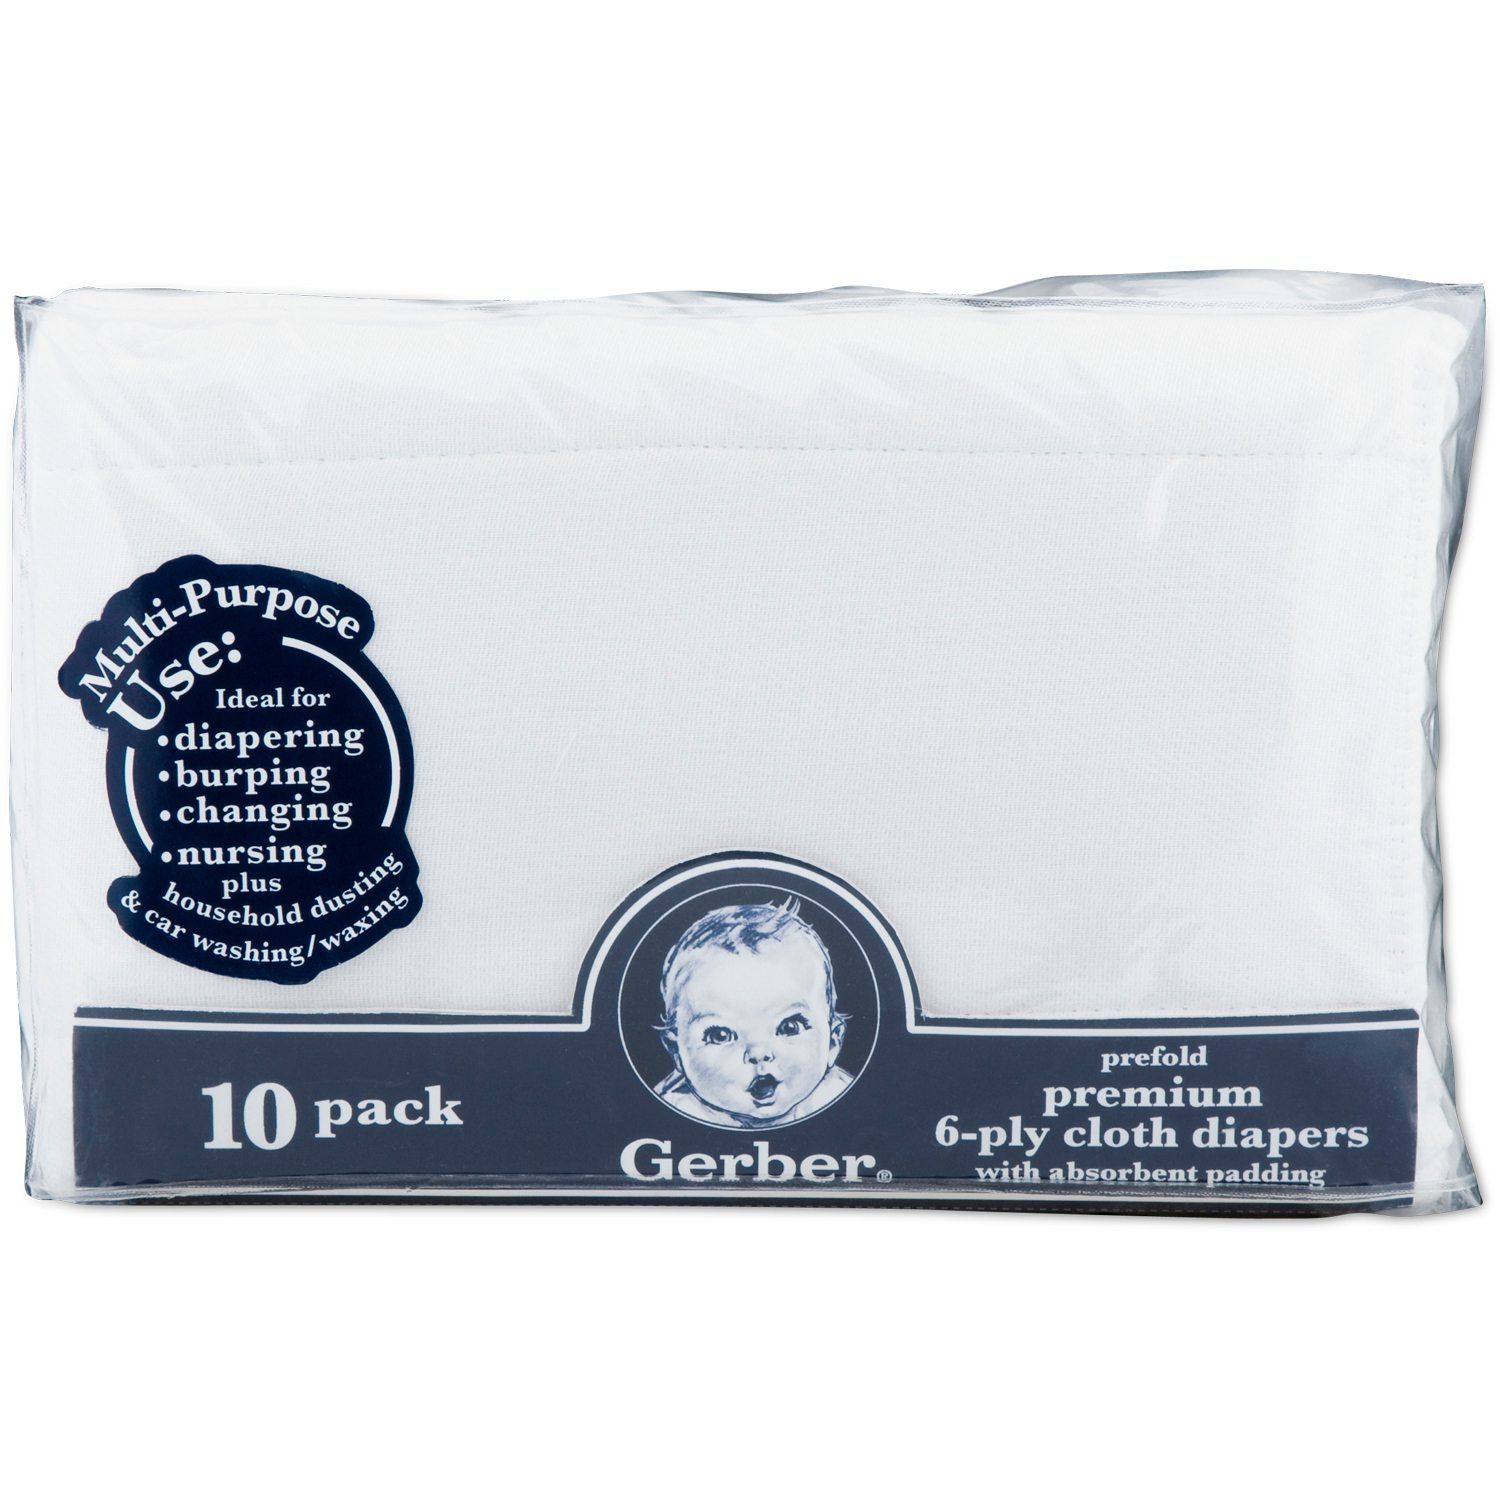 UPC 047213581858 product image for Prefolded Gauze with Pad Cloth Diapers (10 pack) - White | upcitemdb.com